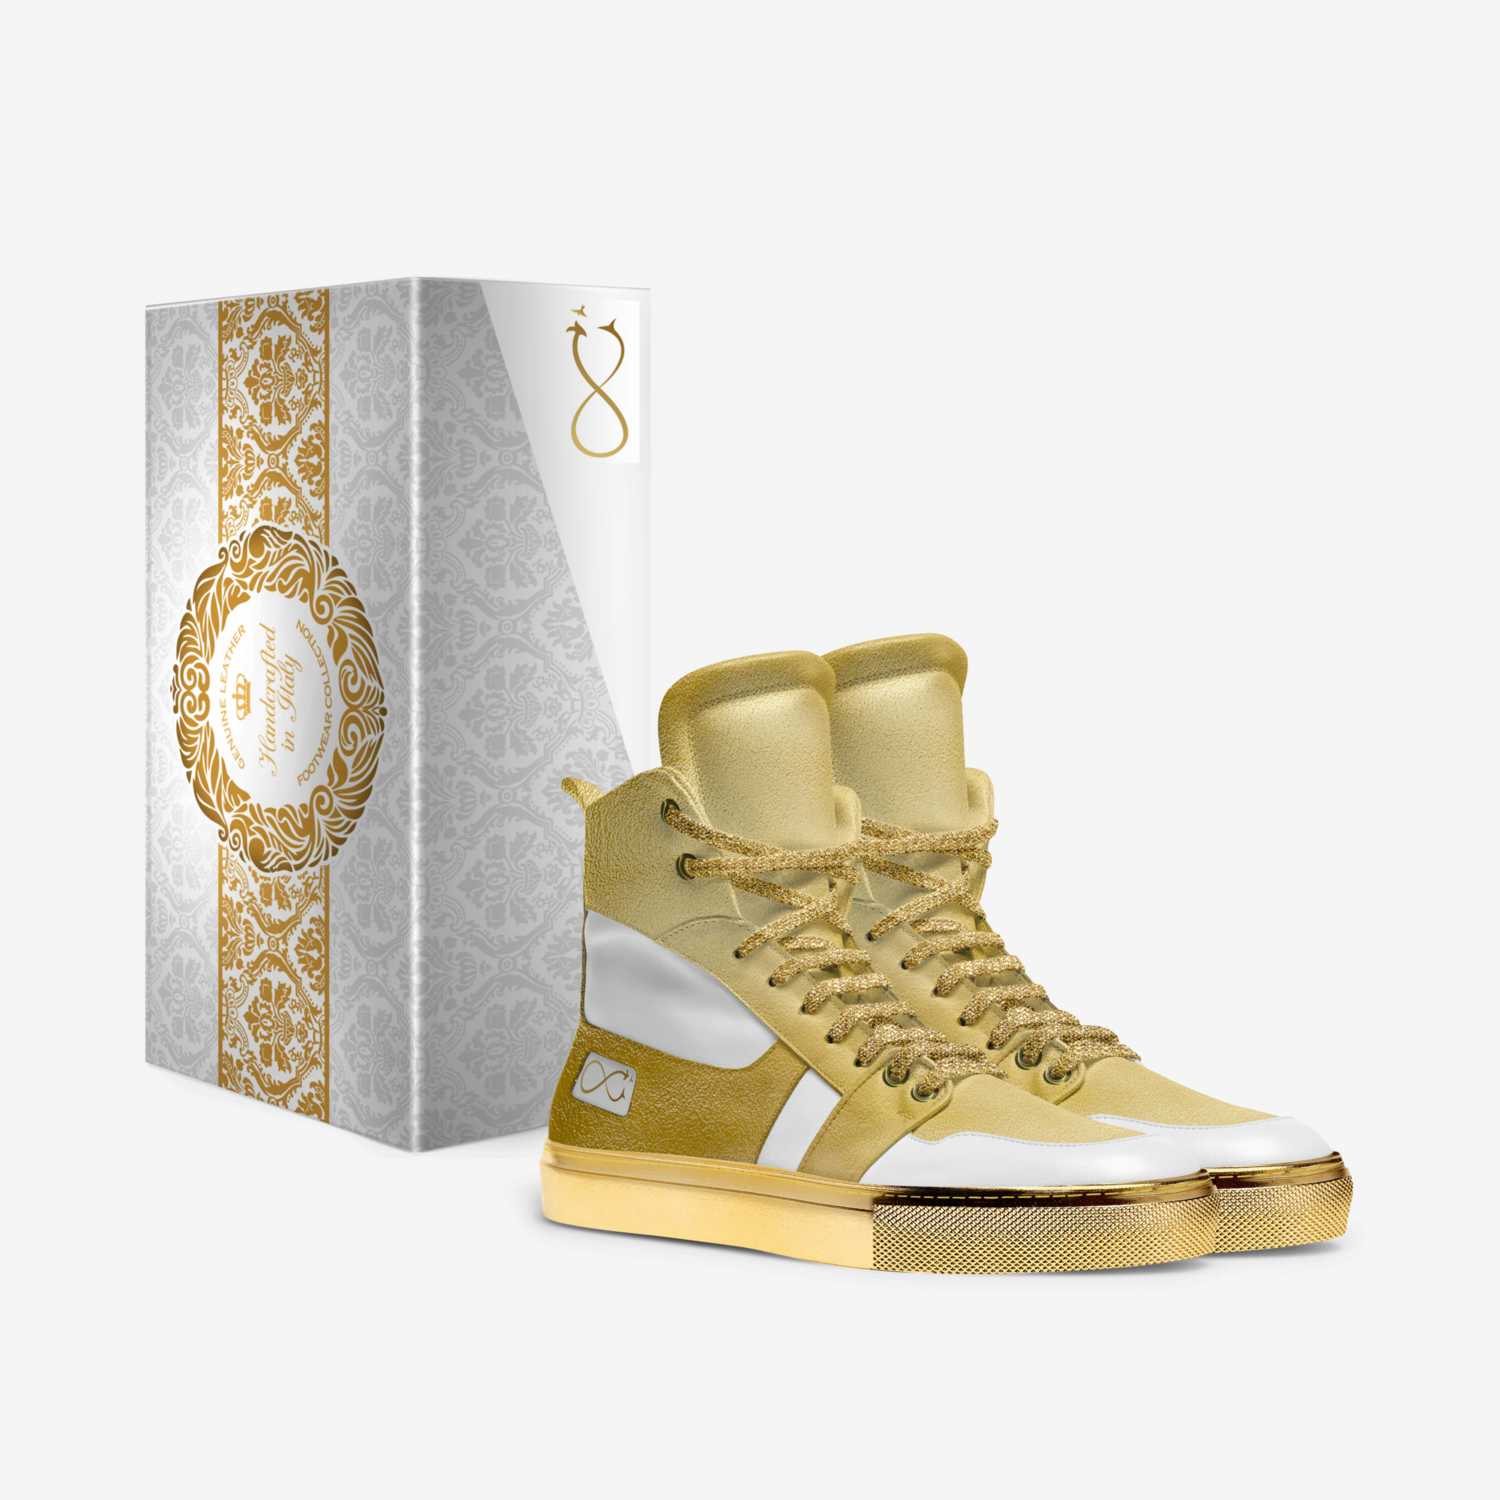 TRUTH GOLDS custom made in Italy shoes by Brooke Ashley | Box view